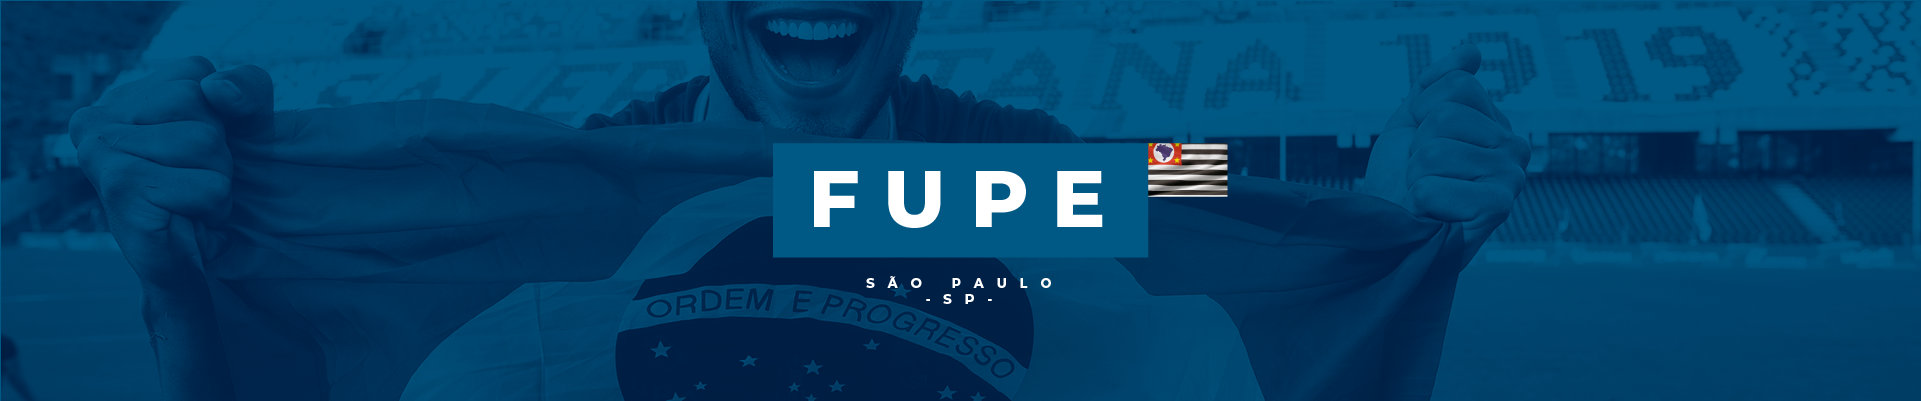 fupe